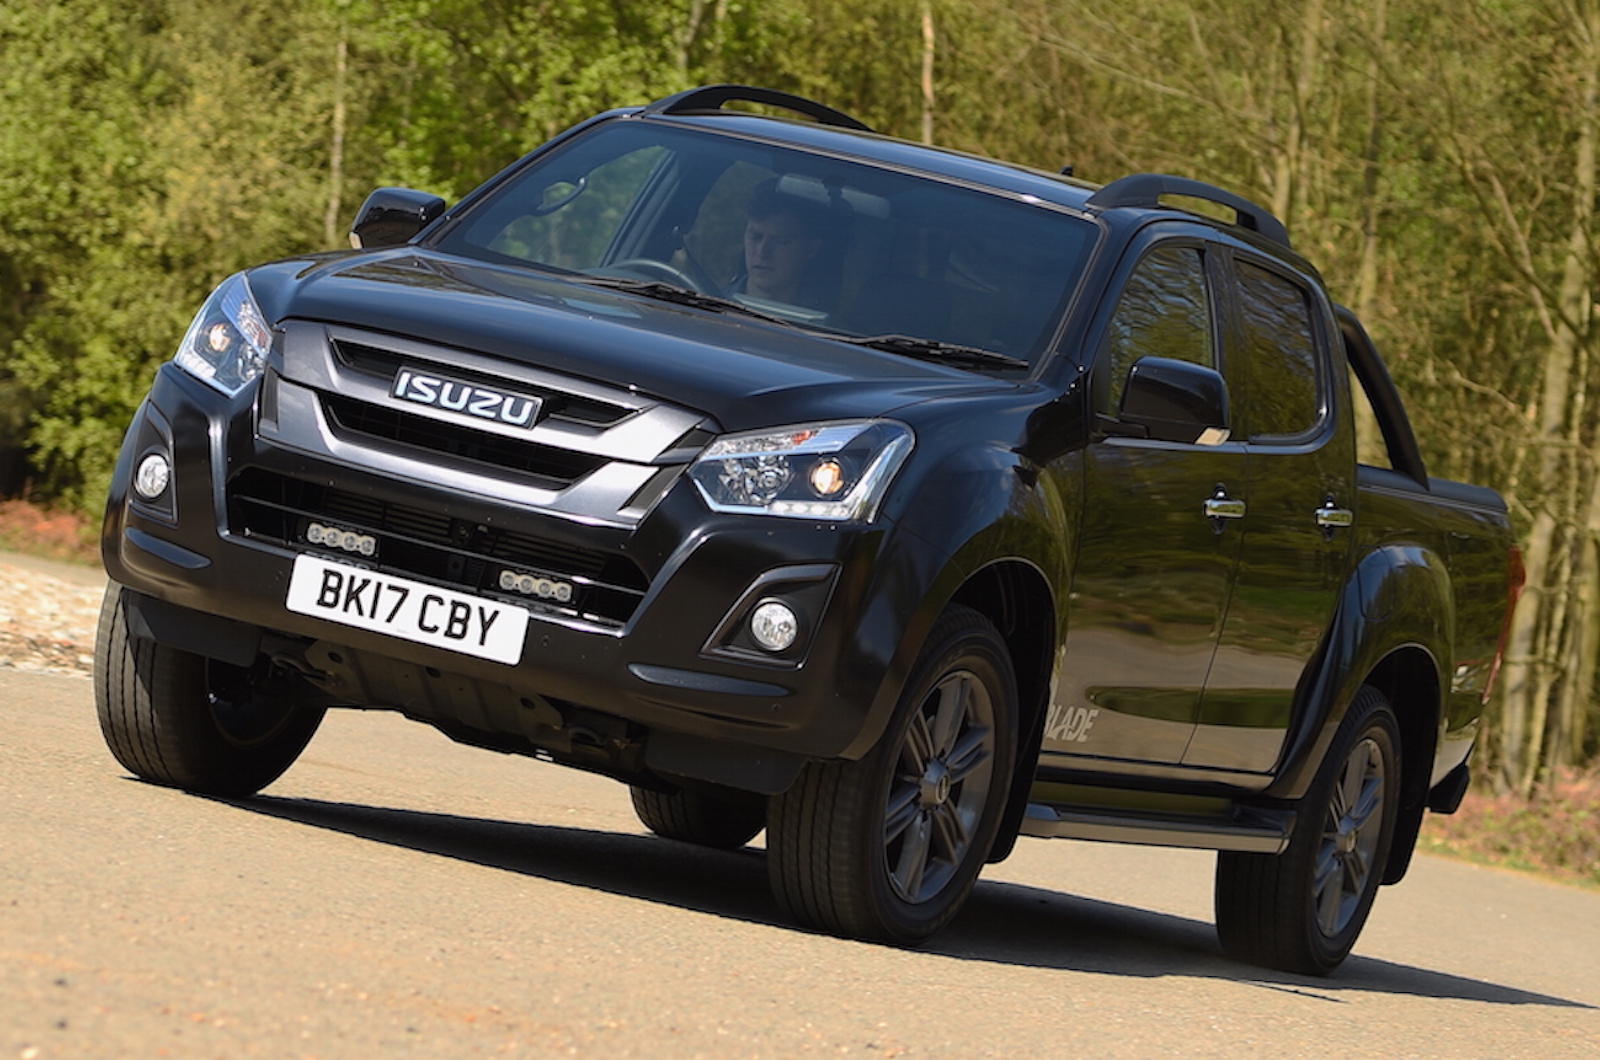 Isuzu DMax 2017 Philippines Great truck apart from minor issues